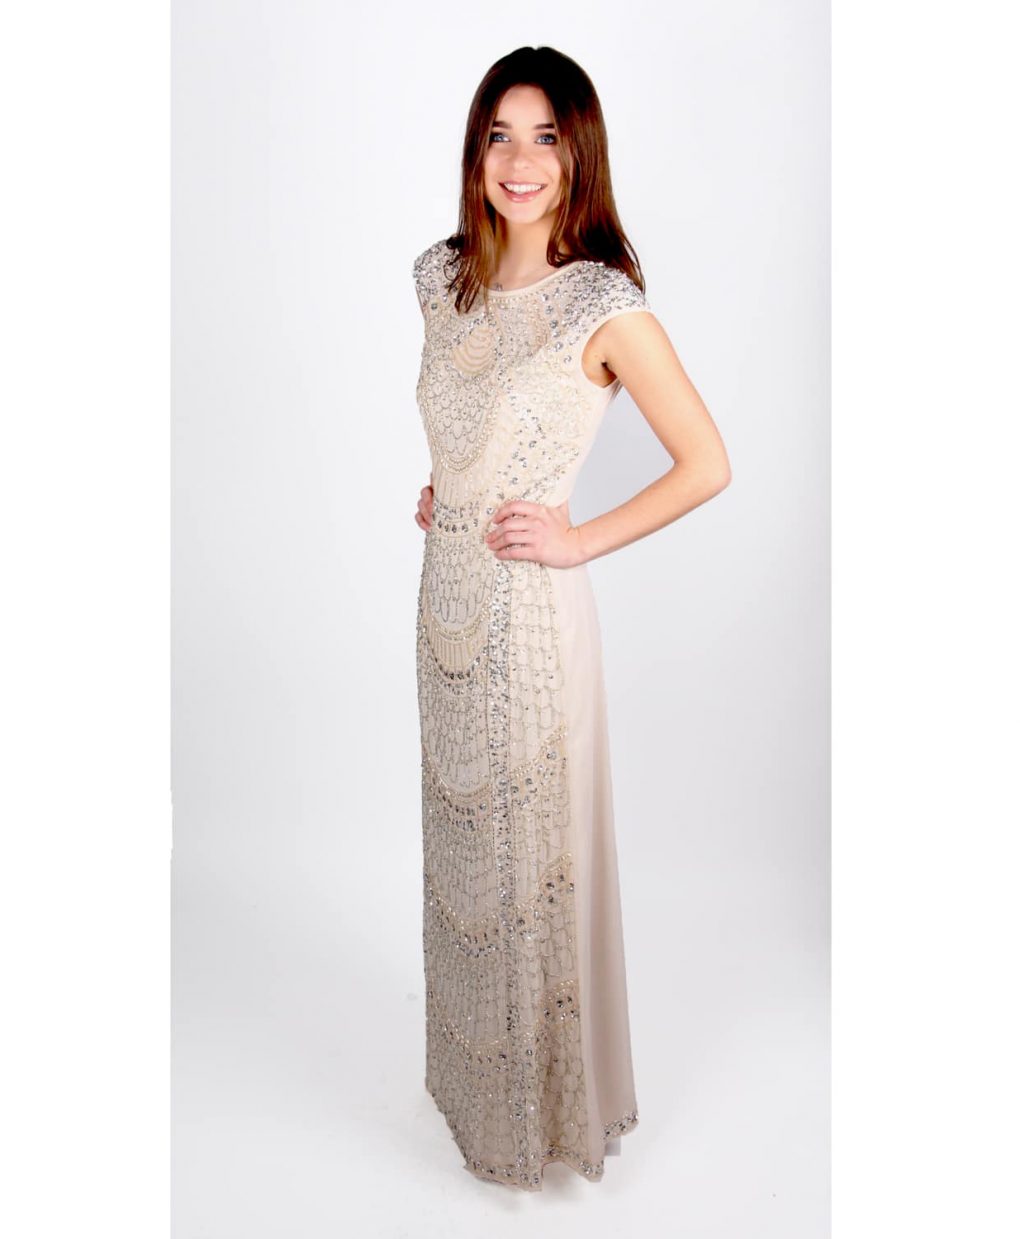 Alila Taupe Sequin Gown by Lace & Beads.